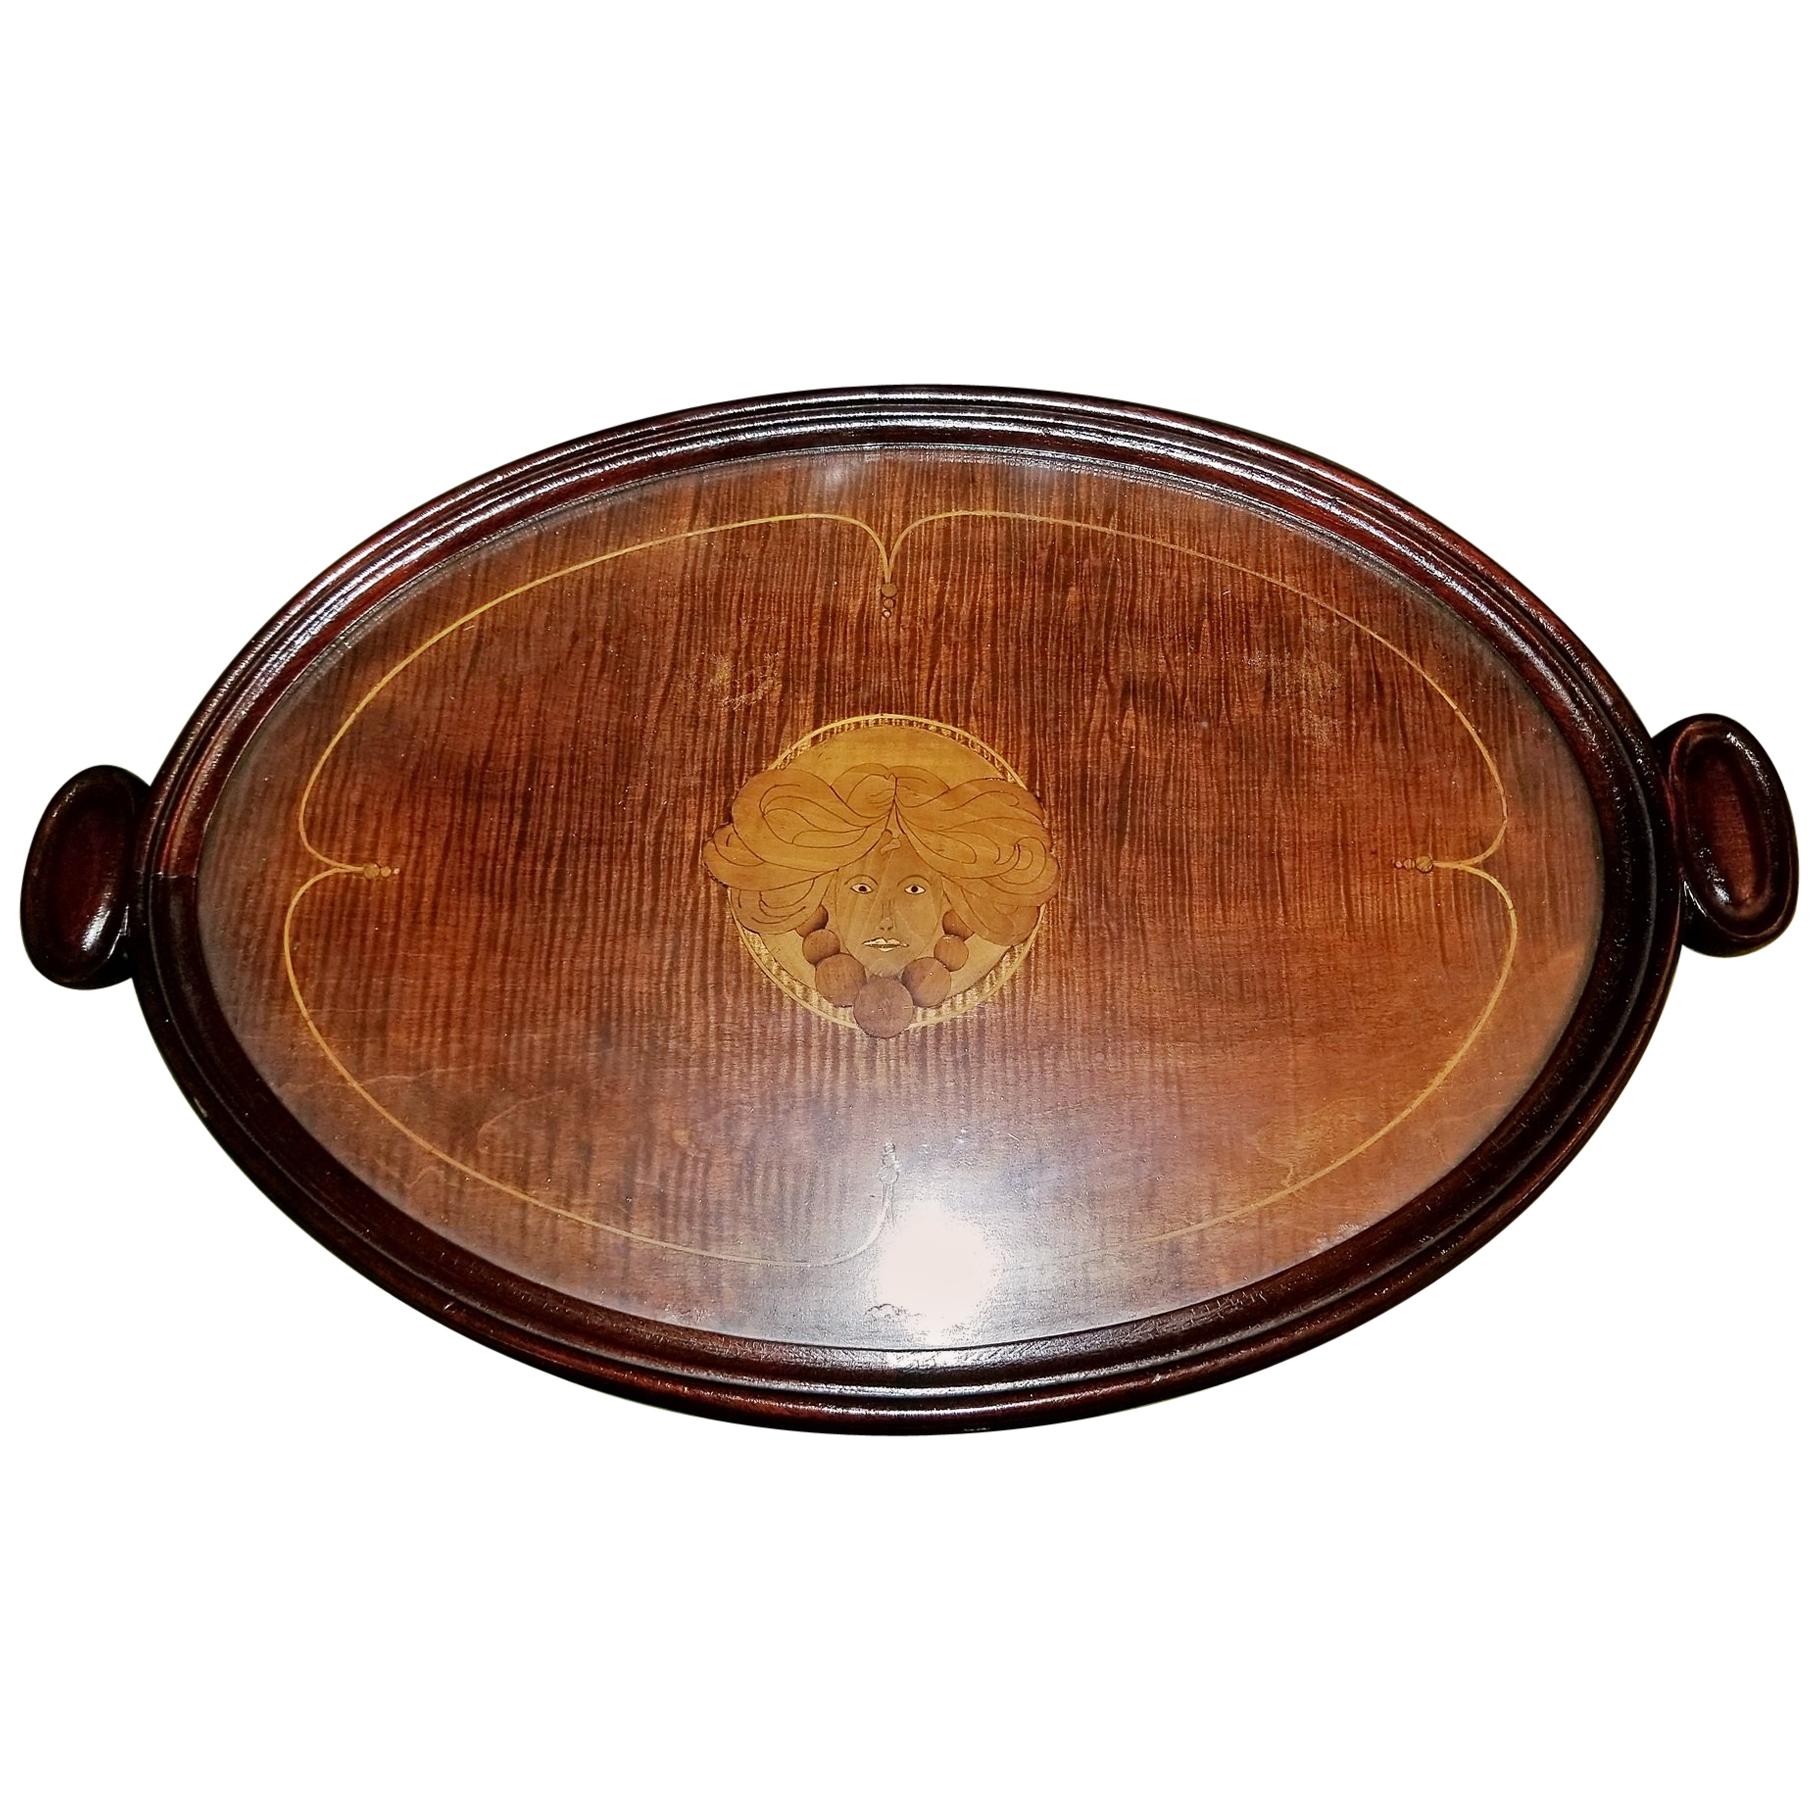 Art Nouveau British Marquetry Inlaid Serving Tray